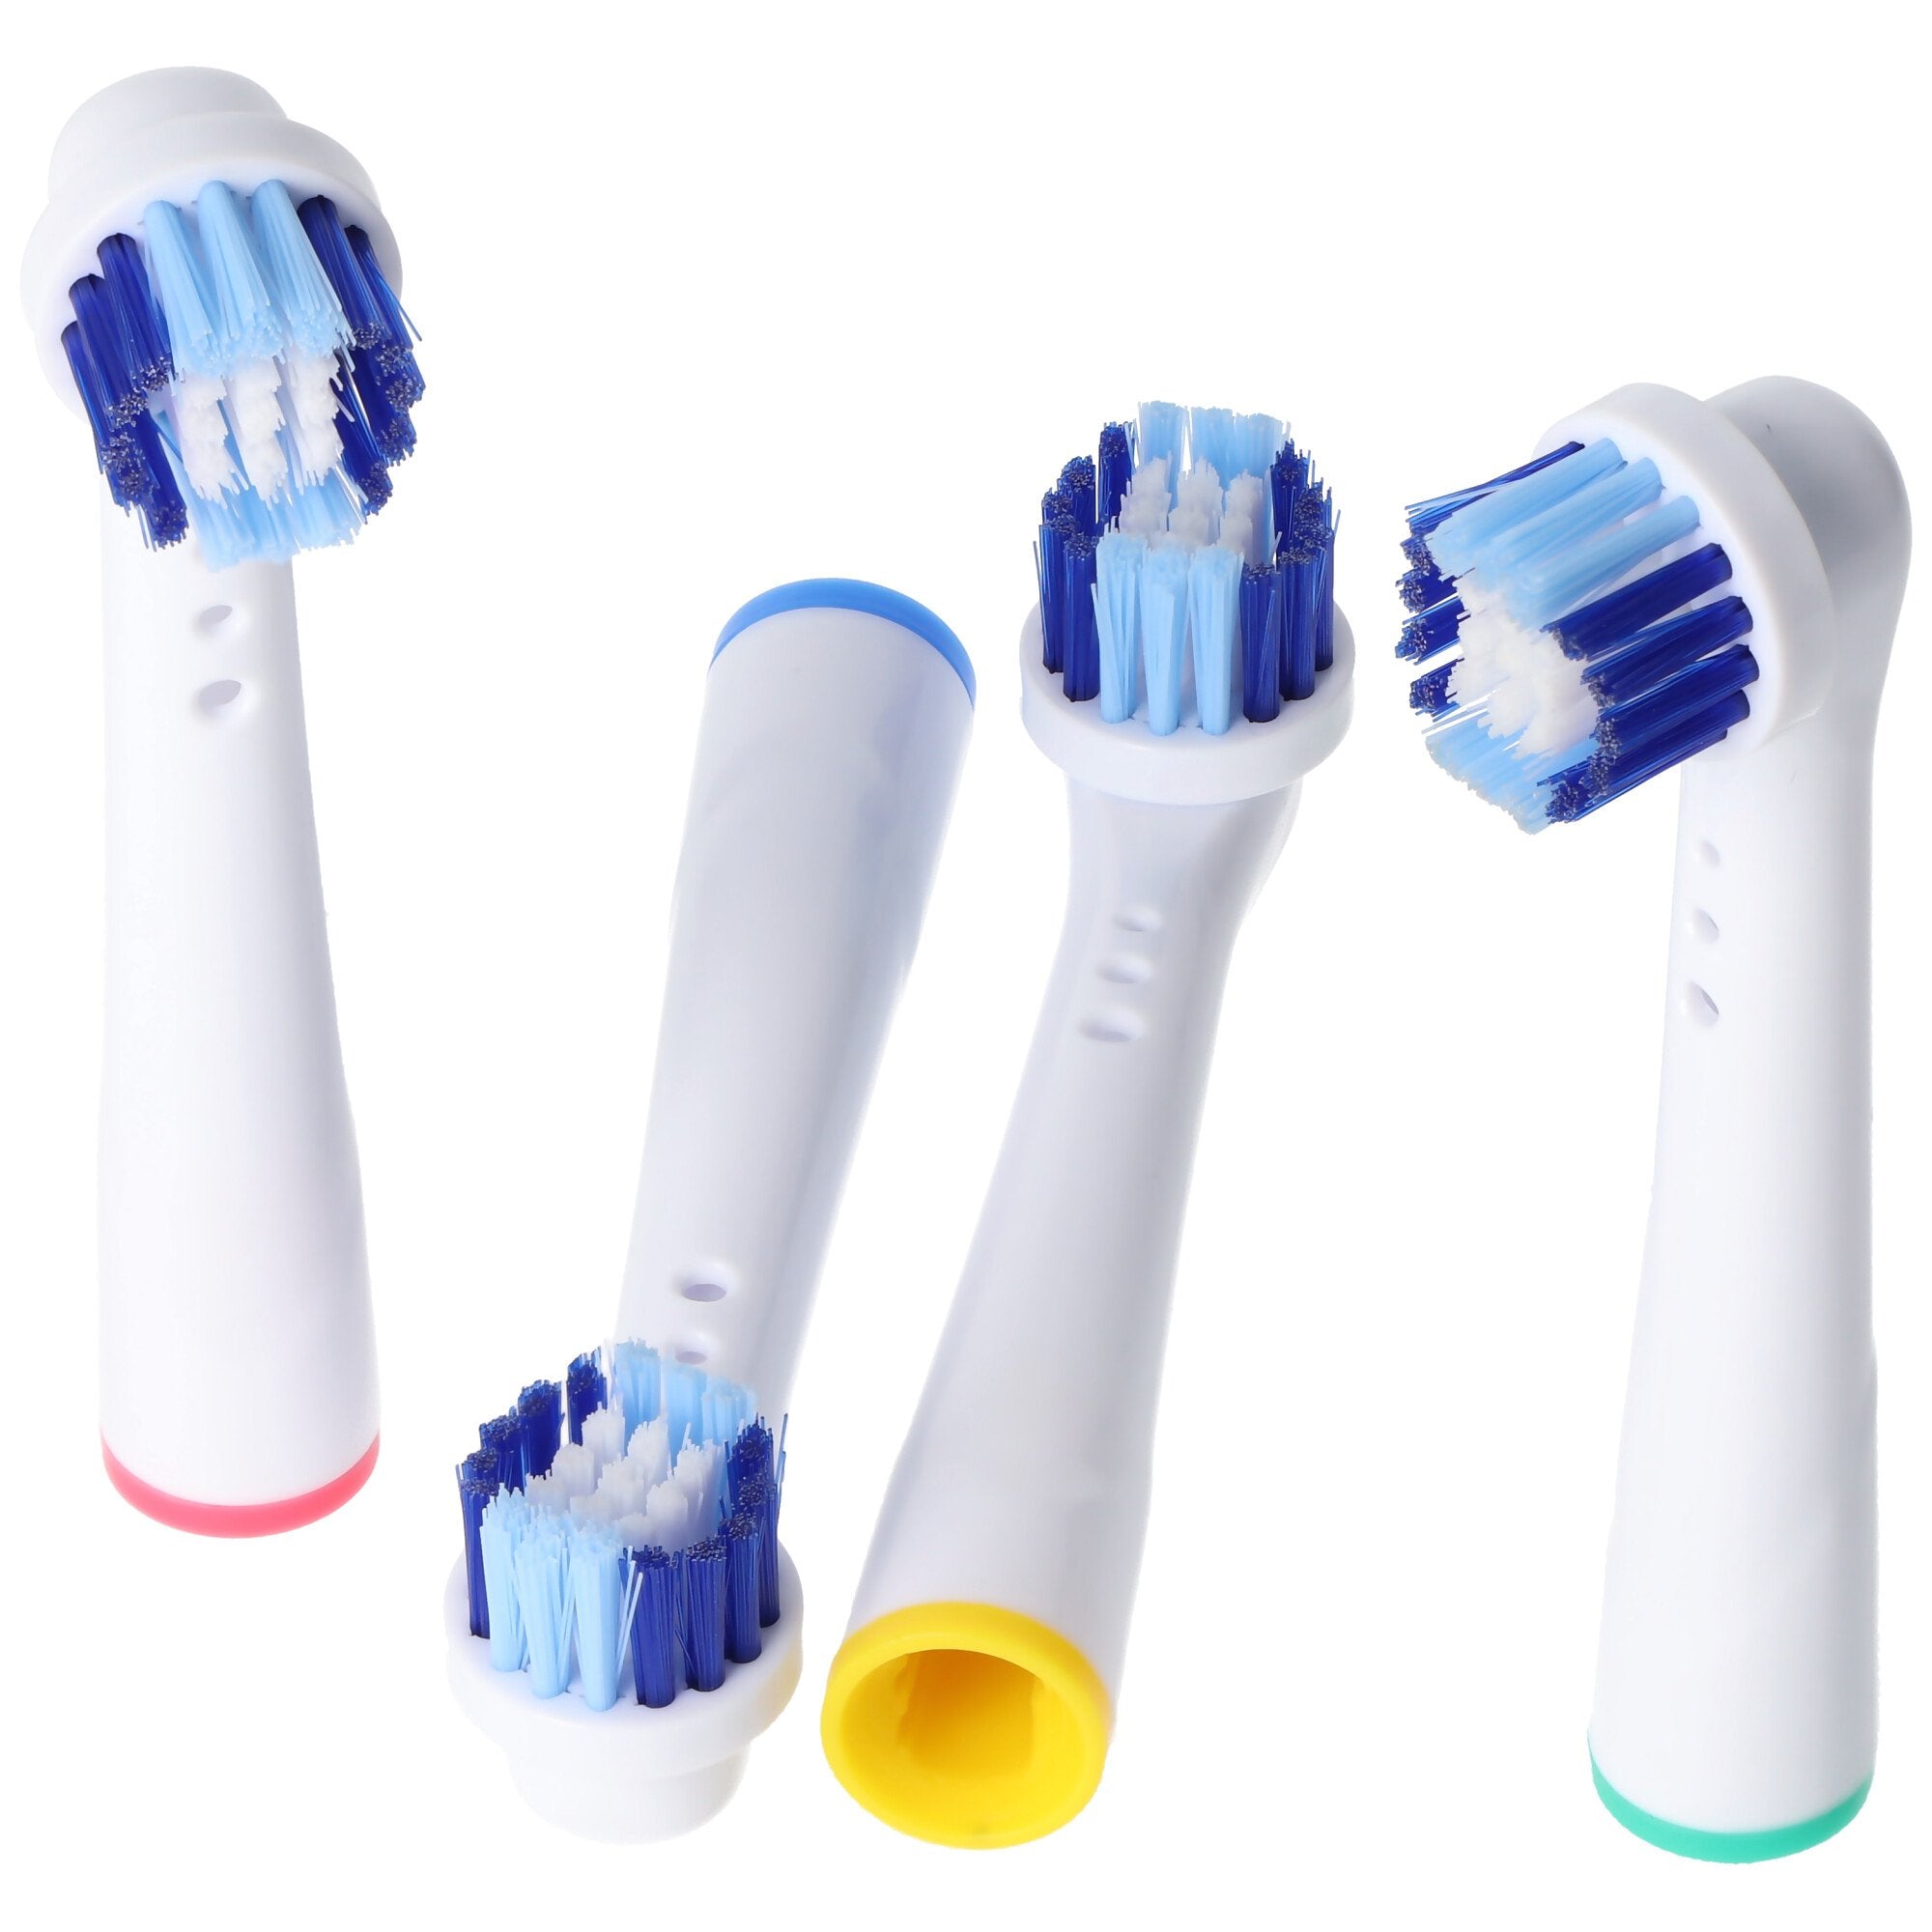 Pack of 4 Cleaning Brush V2 replacement toothbrush heads for electric toothbrushes from Oral-B, suit